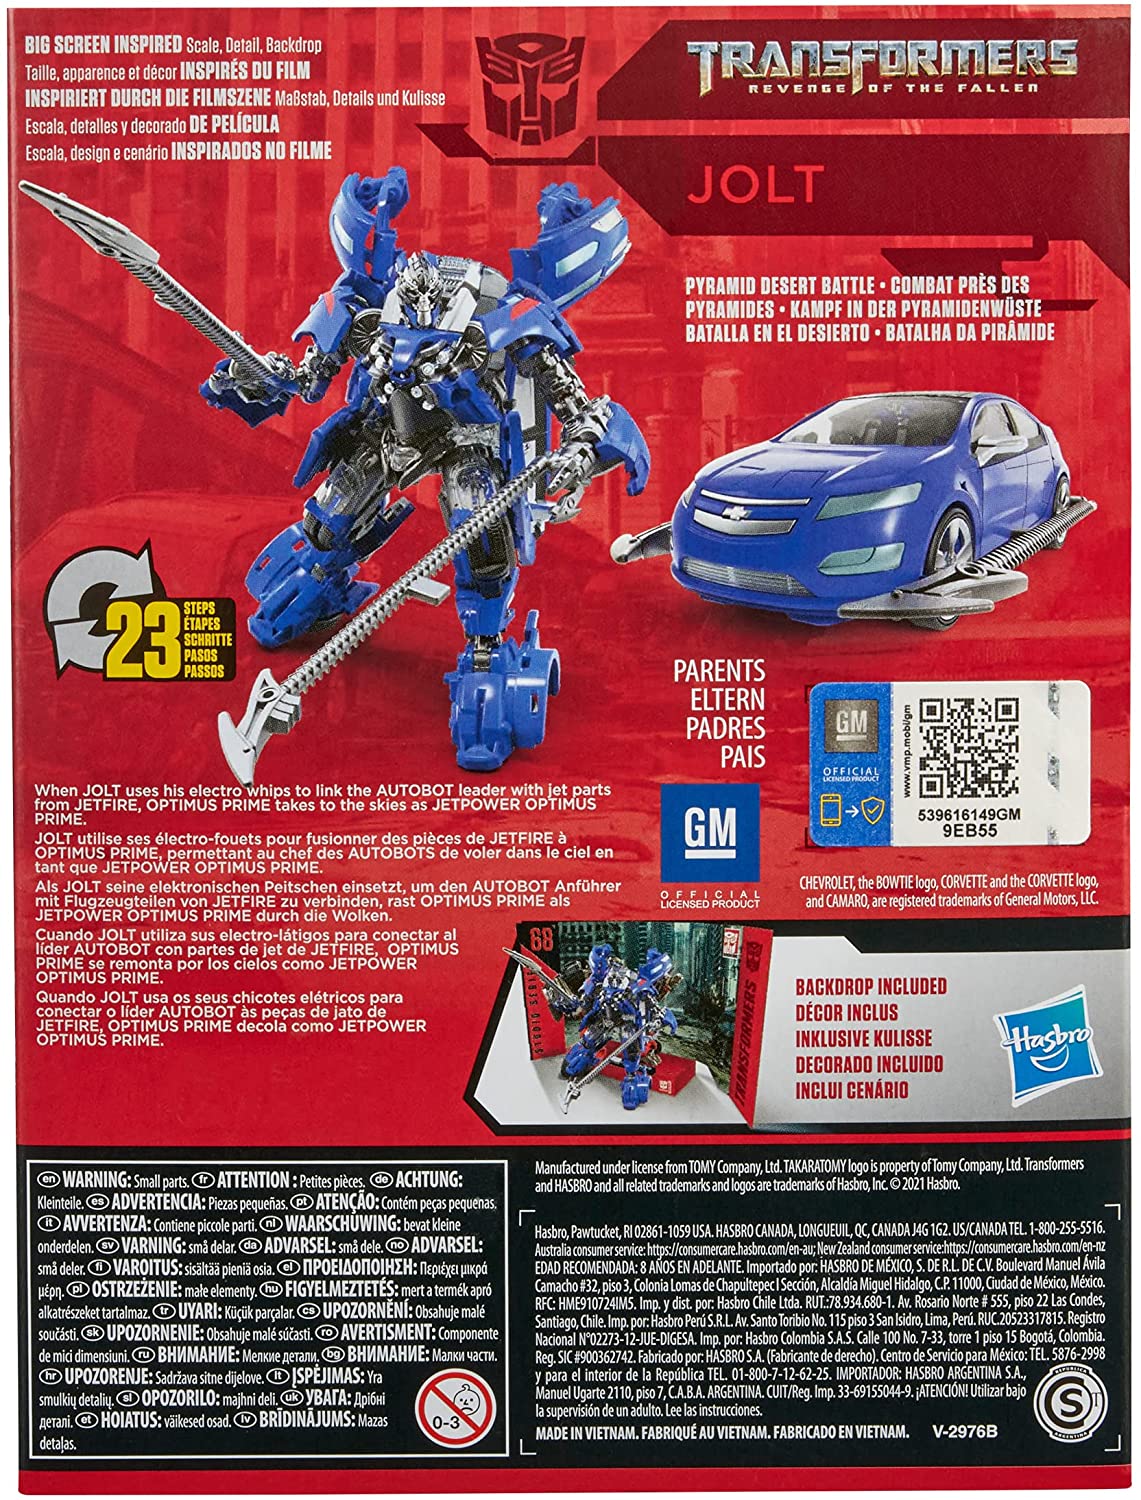 Transformers Toys Studio Series 75 Deluxe Class Transformers: Revenge of The Fallen Jolt Action Figure - Ages 8 and Up, 4.5-inch - Action & Toy Figures Heretoserveyou